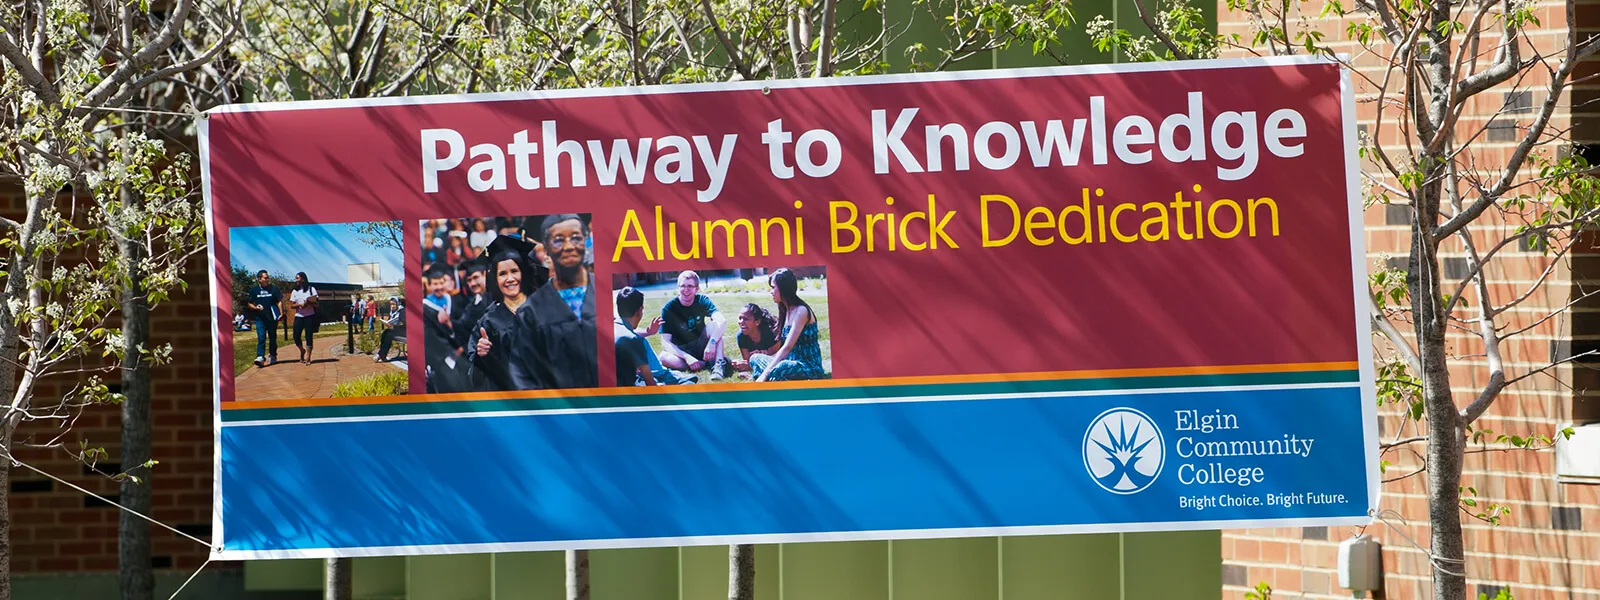 Pathway to Knowledge banner